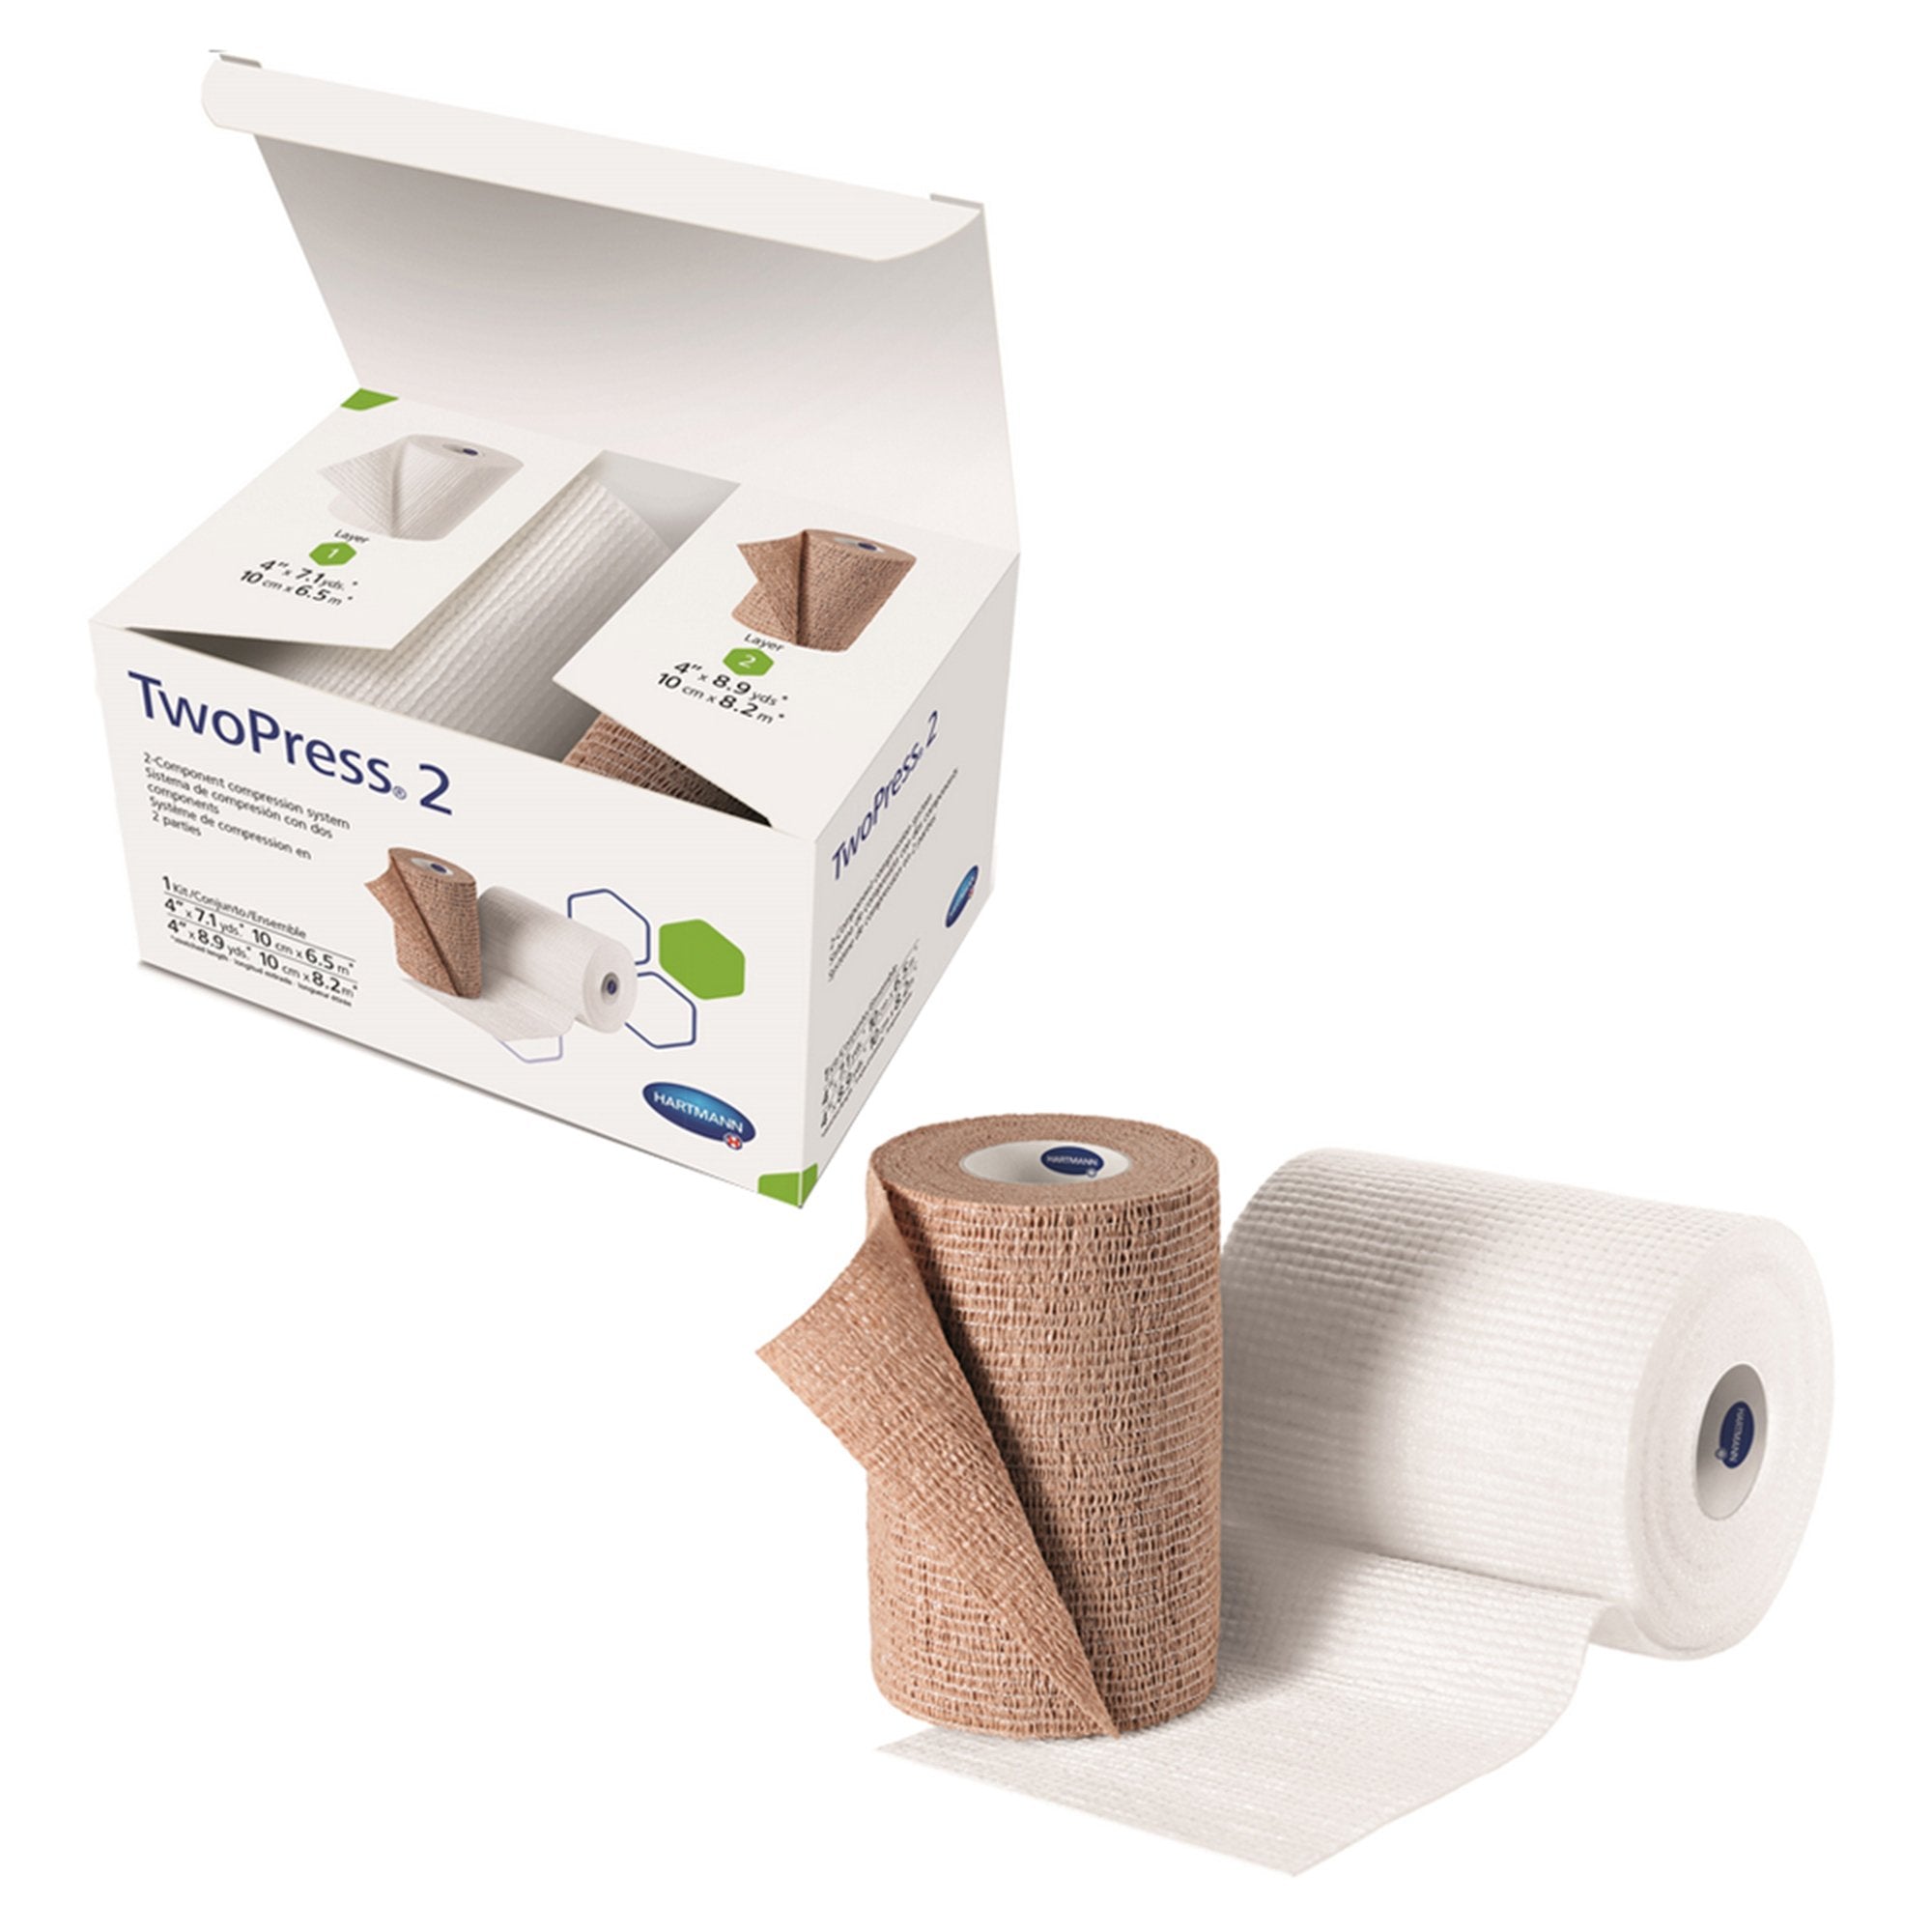 2 Layer Compression Bandage System TwoPress® 2 4 Inch X 7 Yard / 4 Inch X 8-9/10 Yard Self-Adherent Closure Tan / White NonSterile 40 mmHg